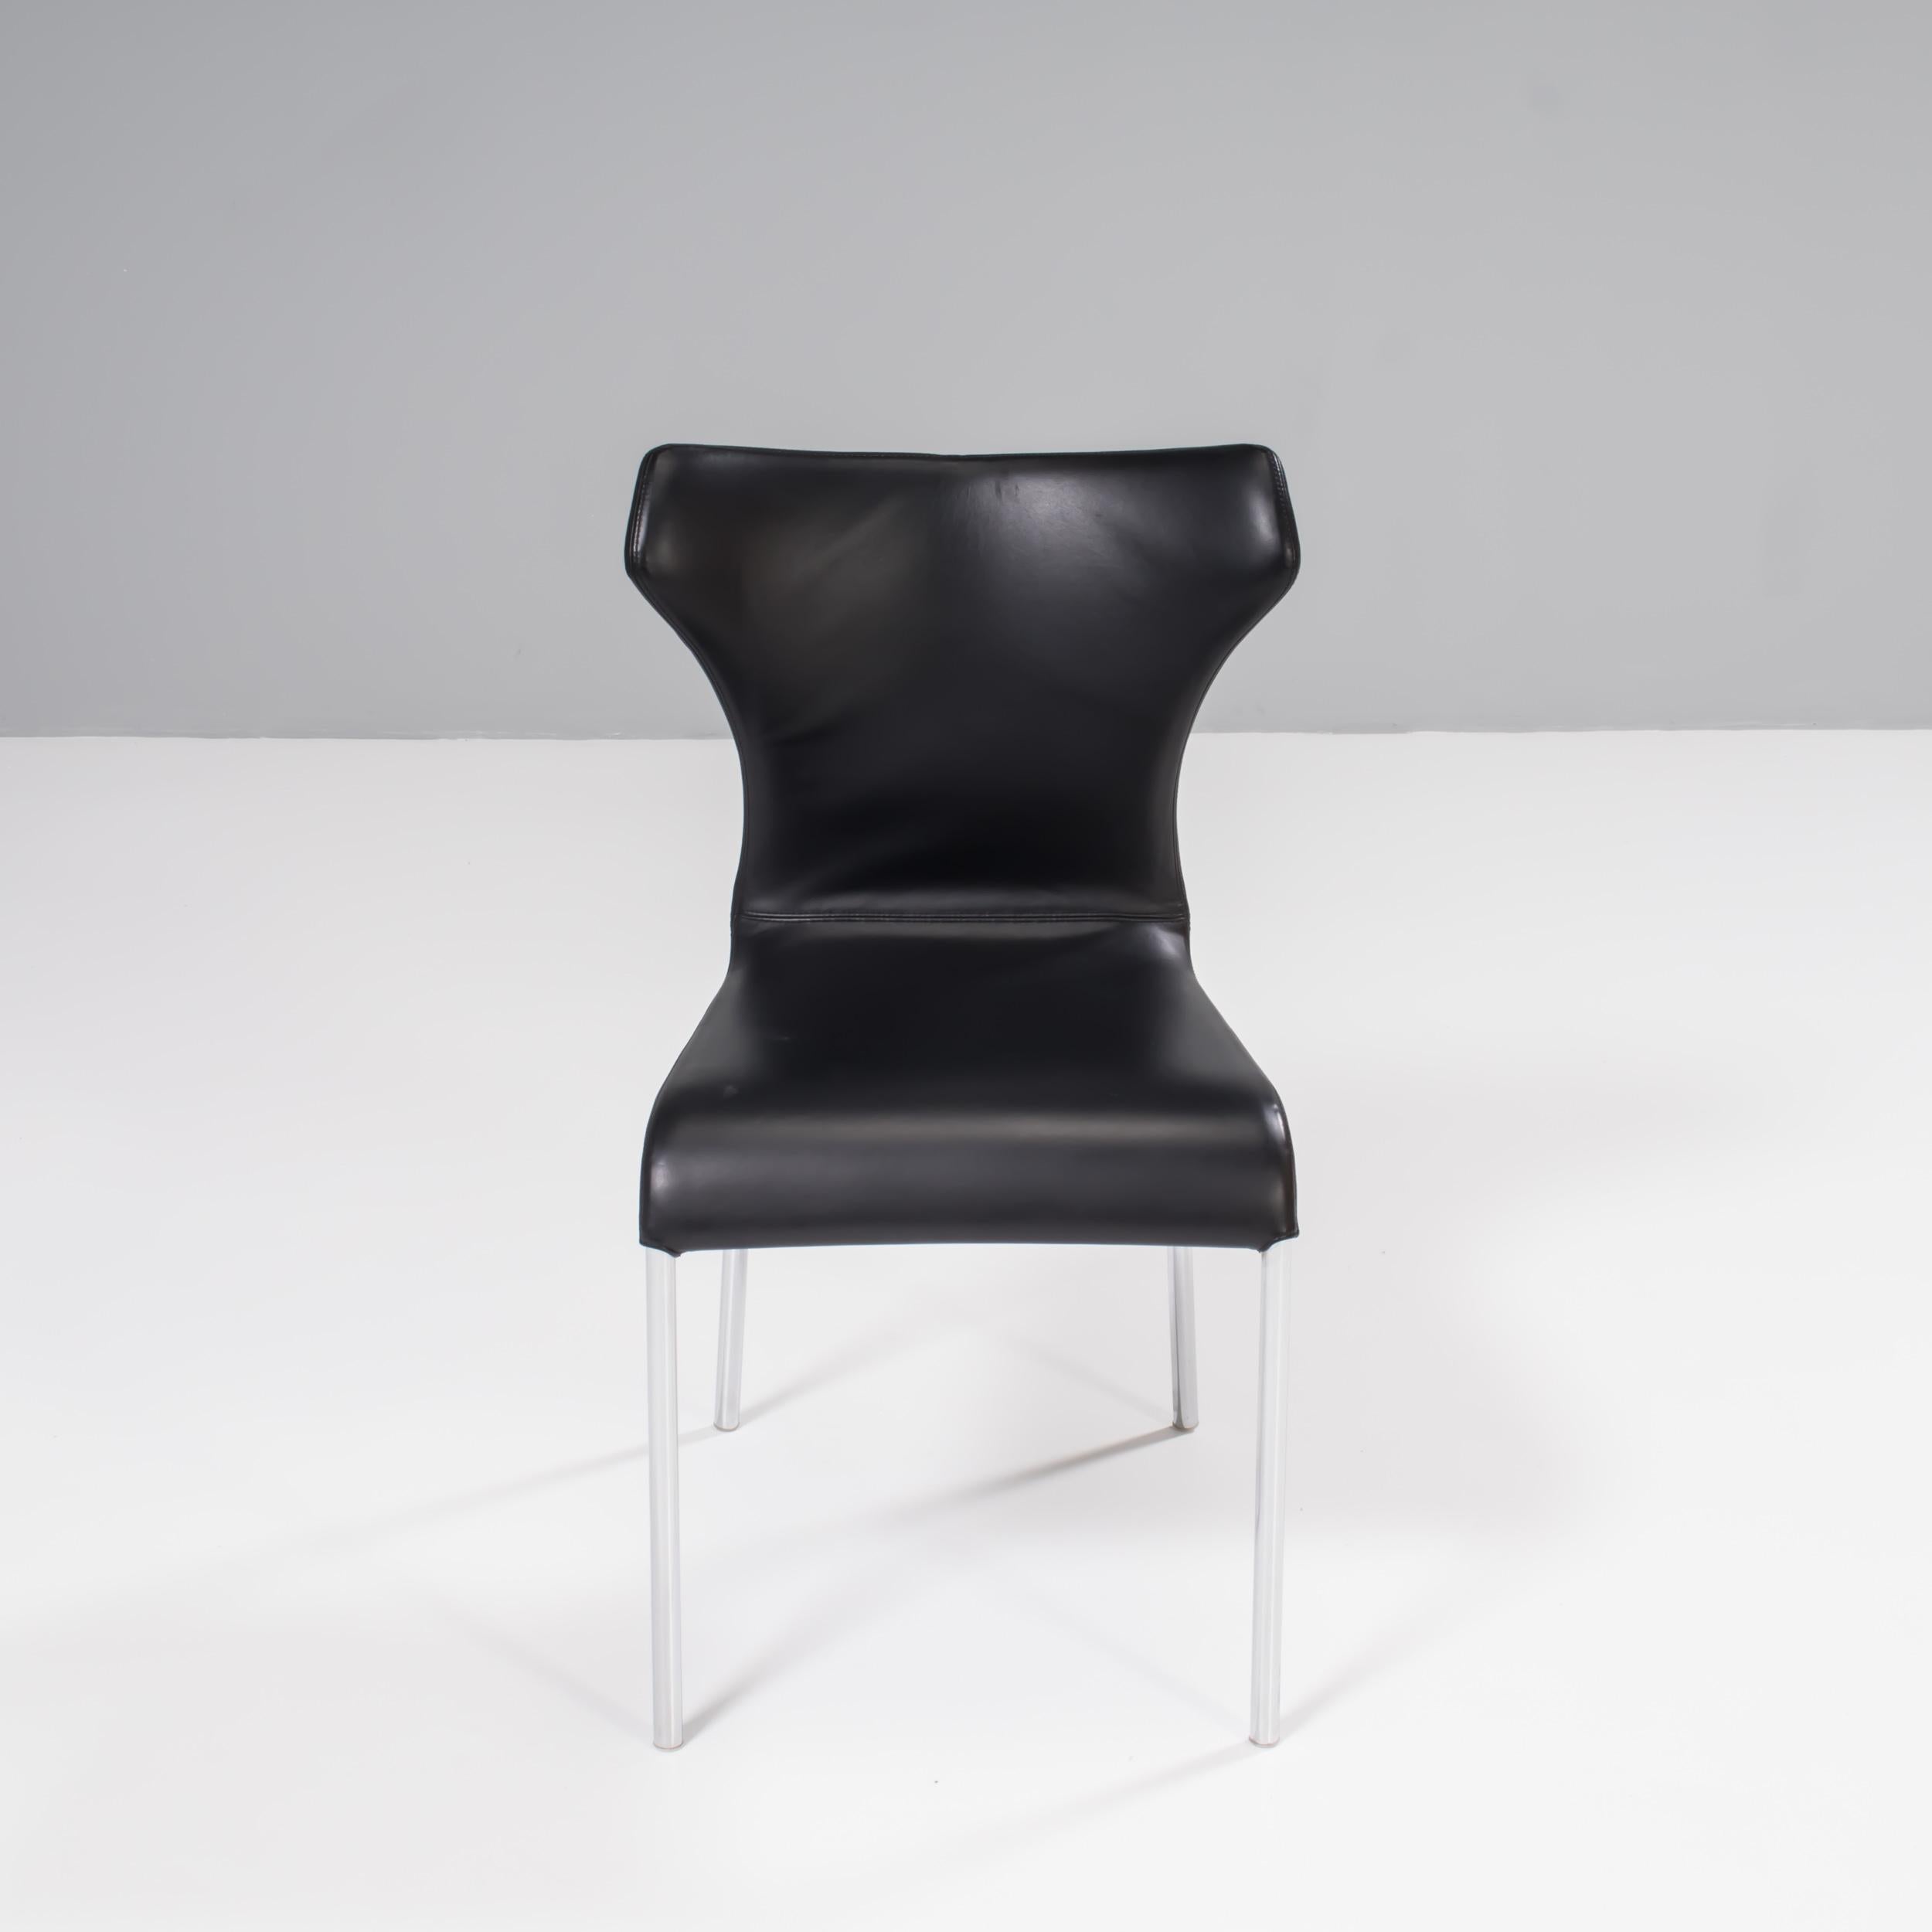 Originally designed by Naoto Fukasawa for B&B Italia in 2008, the Papilio chair takes its name from the Latin word for butterfly.

The curved silhouette, featuring a winged back rest, mirrors the butterflies movement and creates a wide and